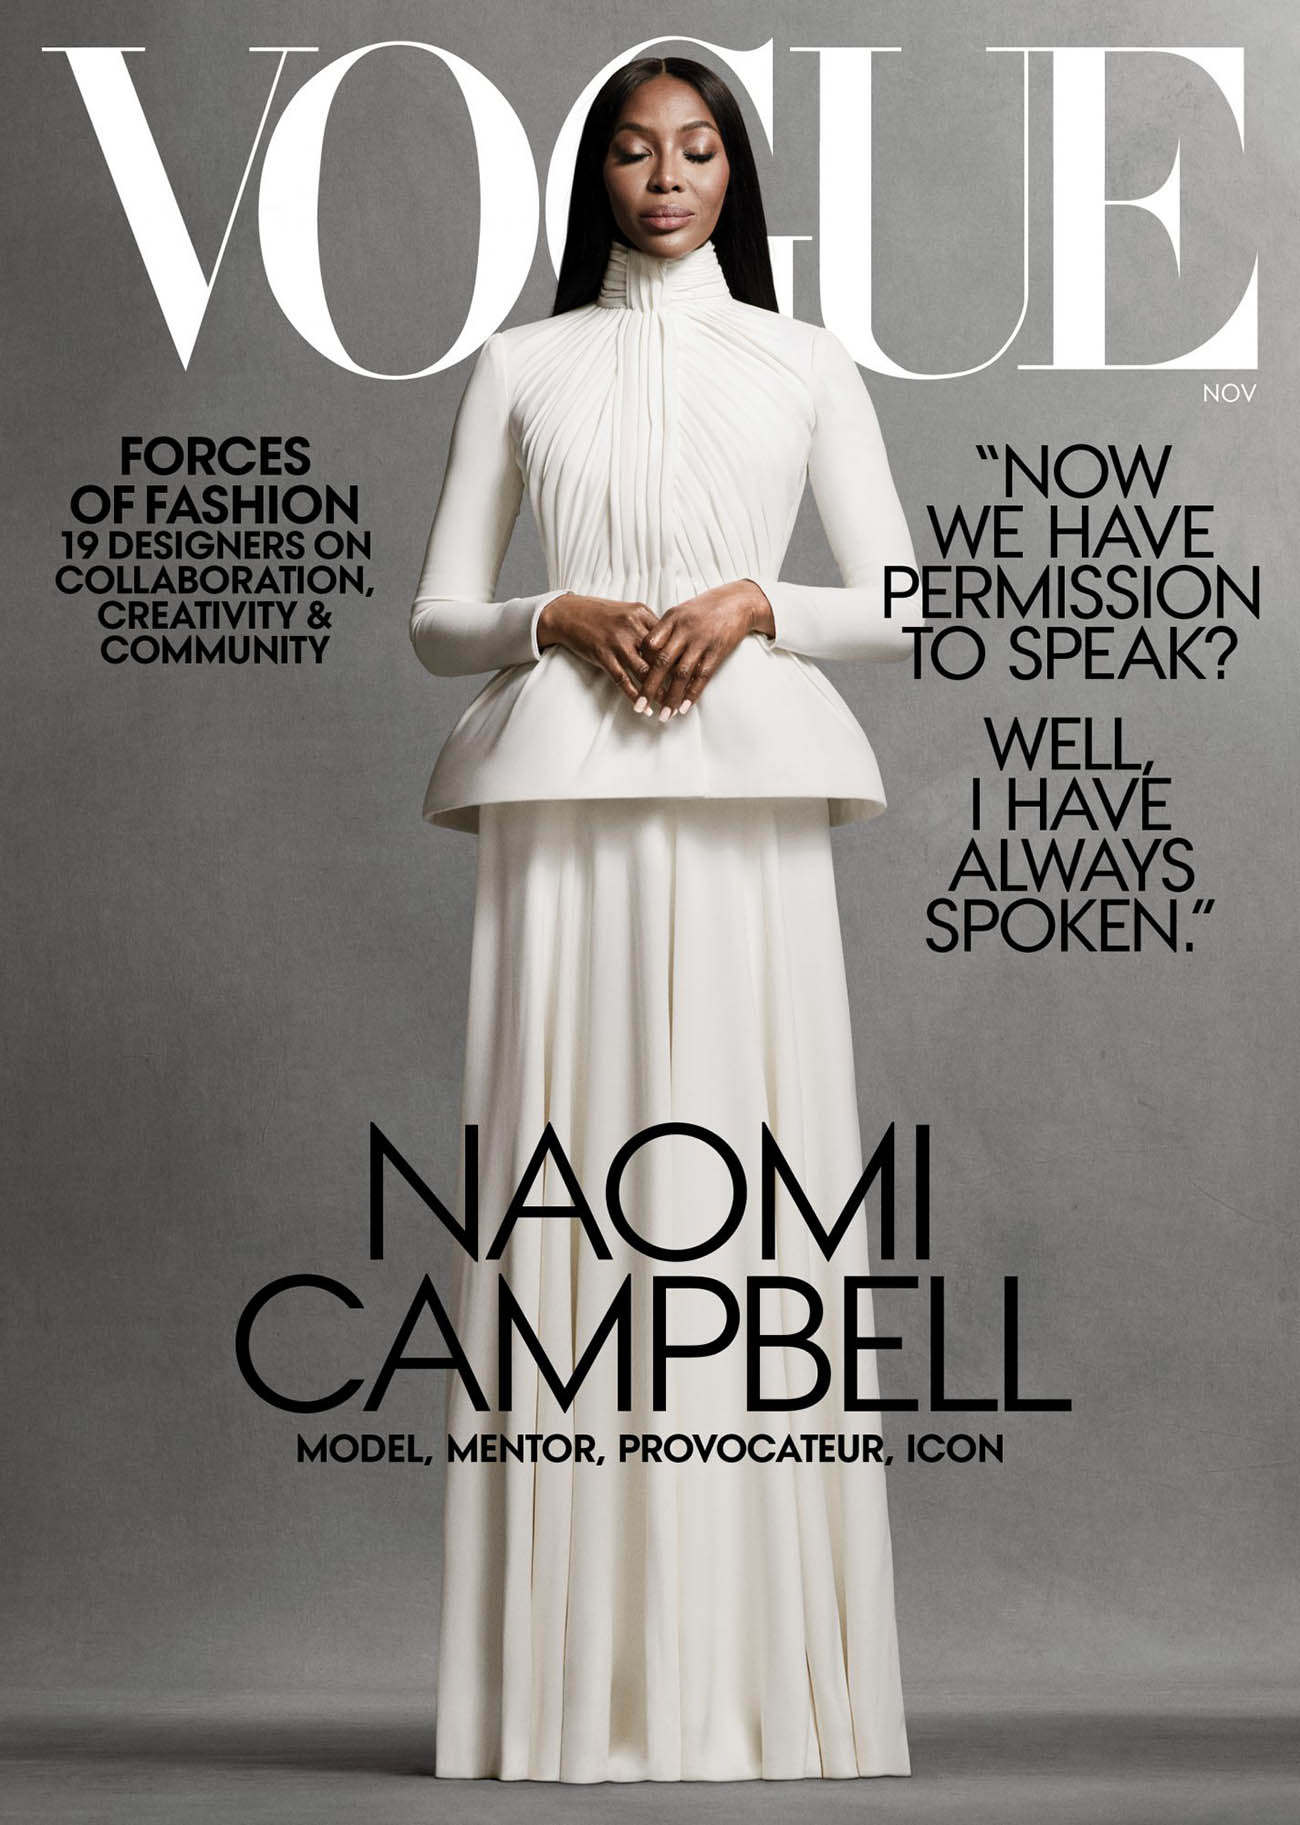 Naomi Campbell covers Vogue US November 2020 by Ethan James Green